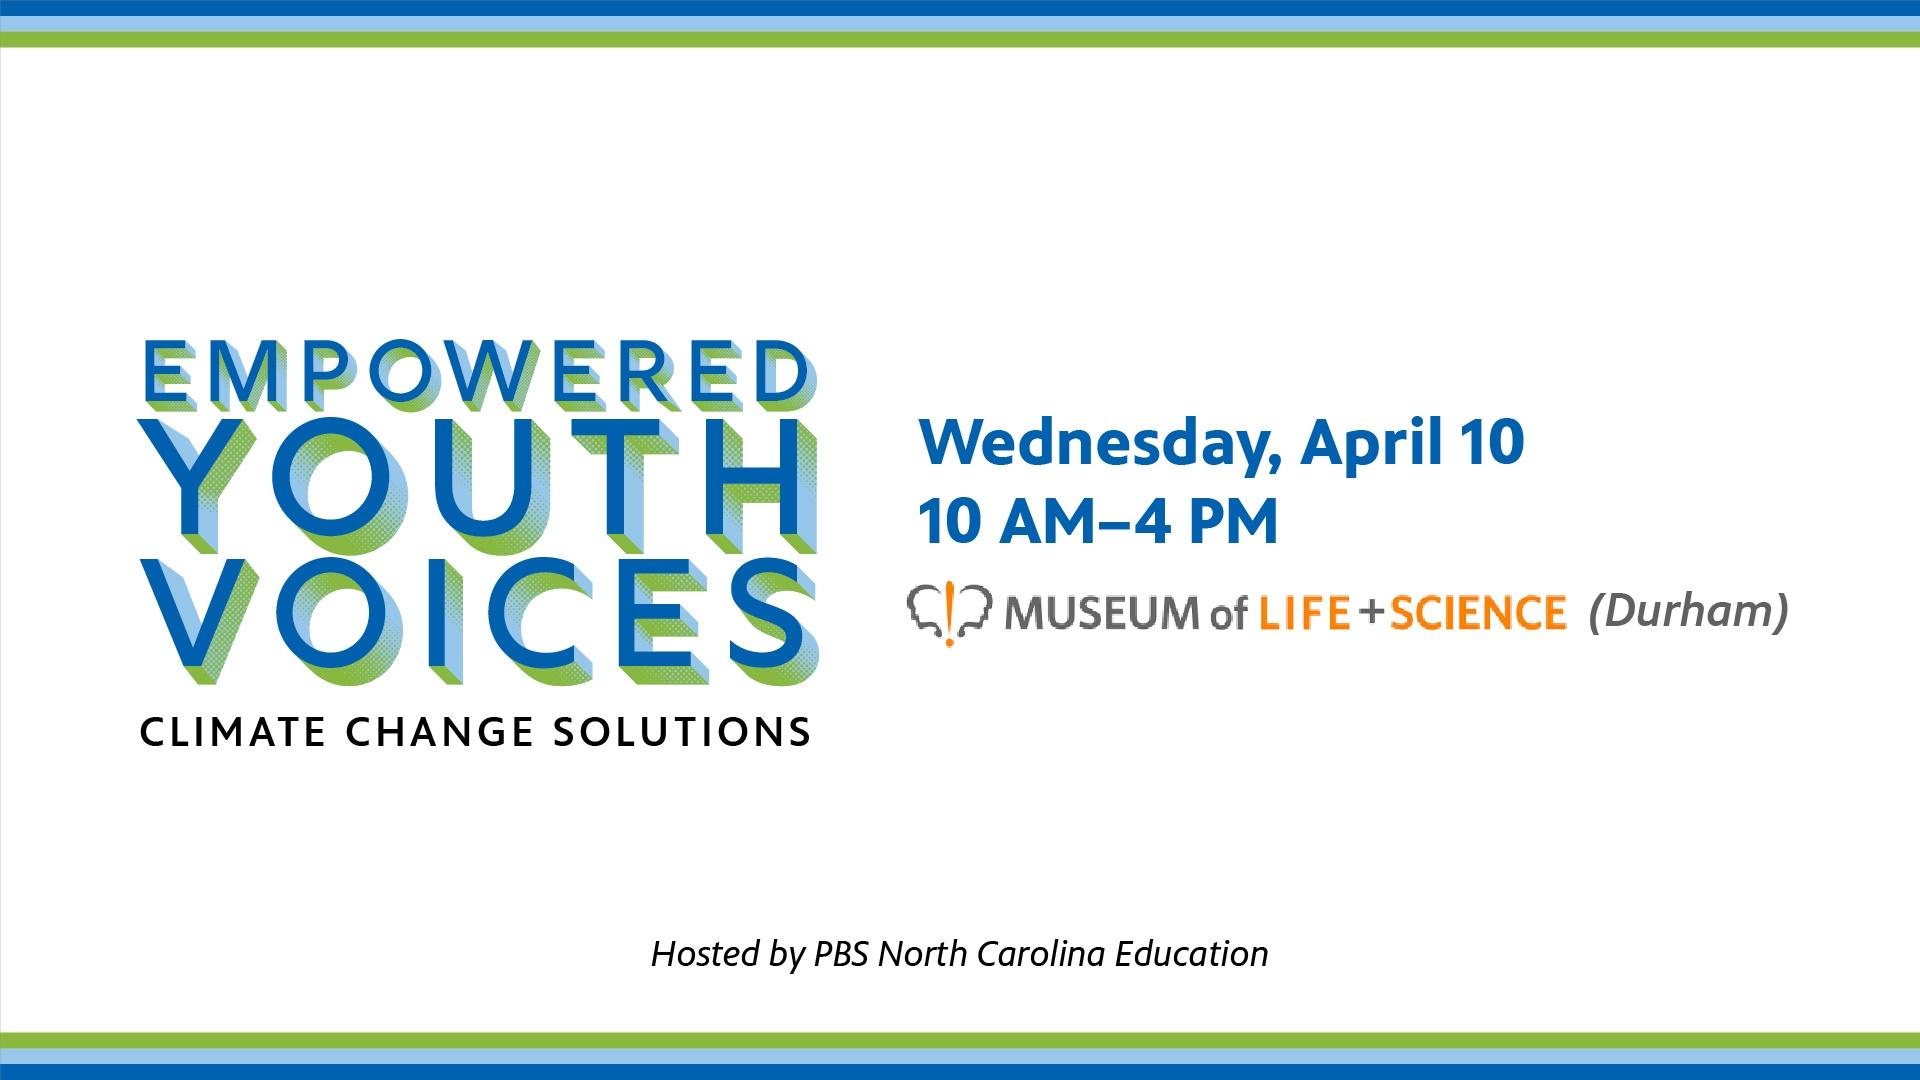 Empowered Youth Voices Climate Change Solutions event. Wednesday, April 10, 10 AM-4 PM at the Museum of Life and Sciences (Durham). Hosted by PBS North Carolina Education.